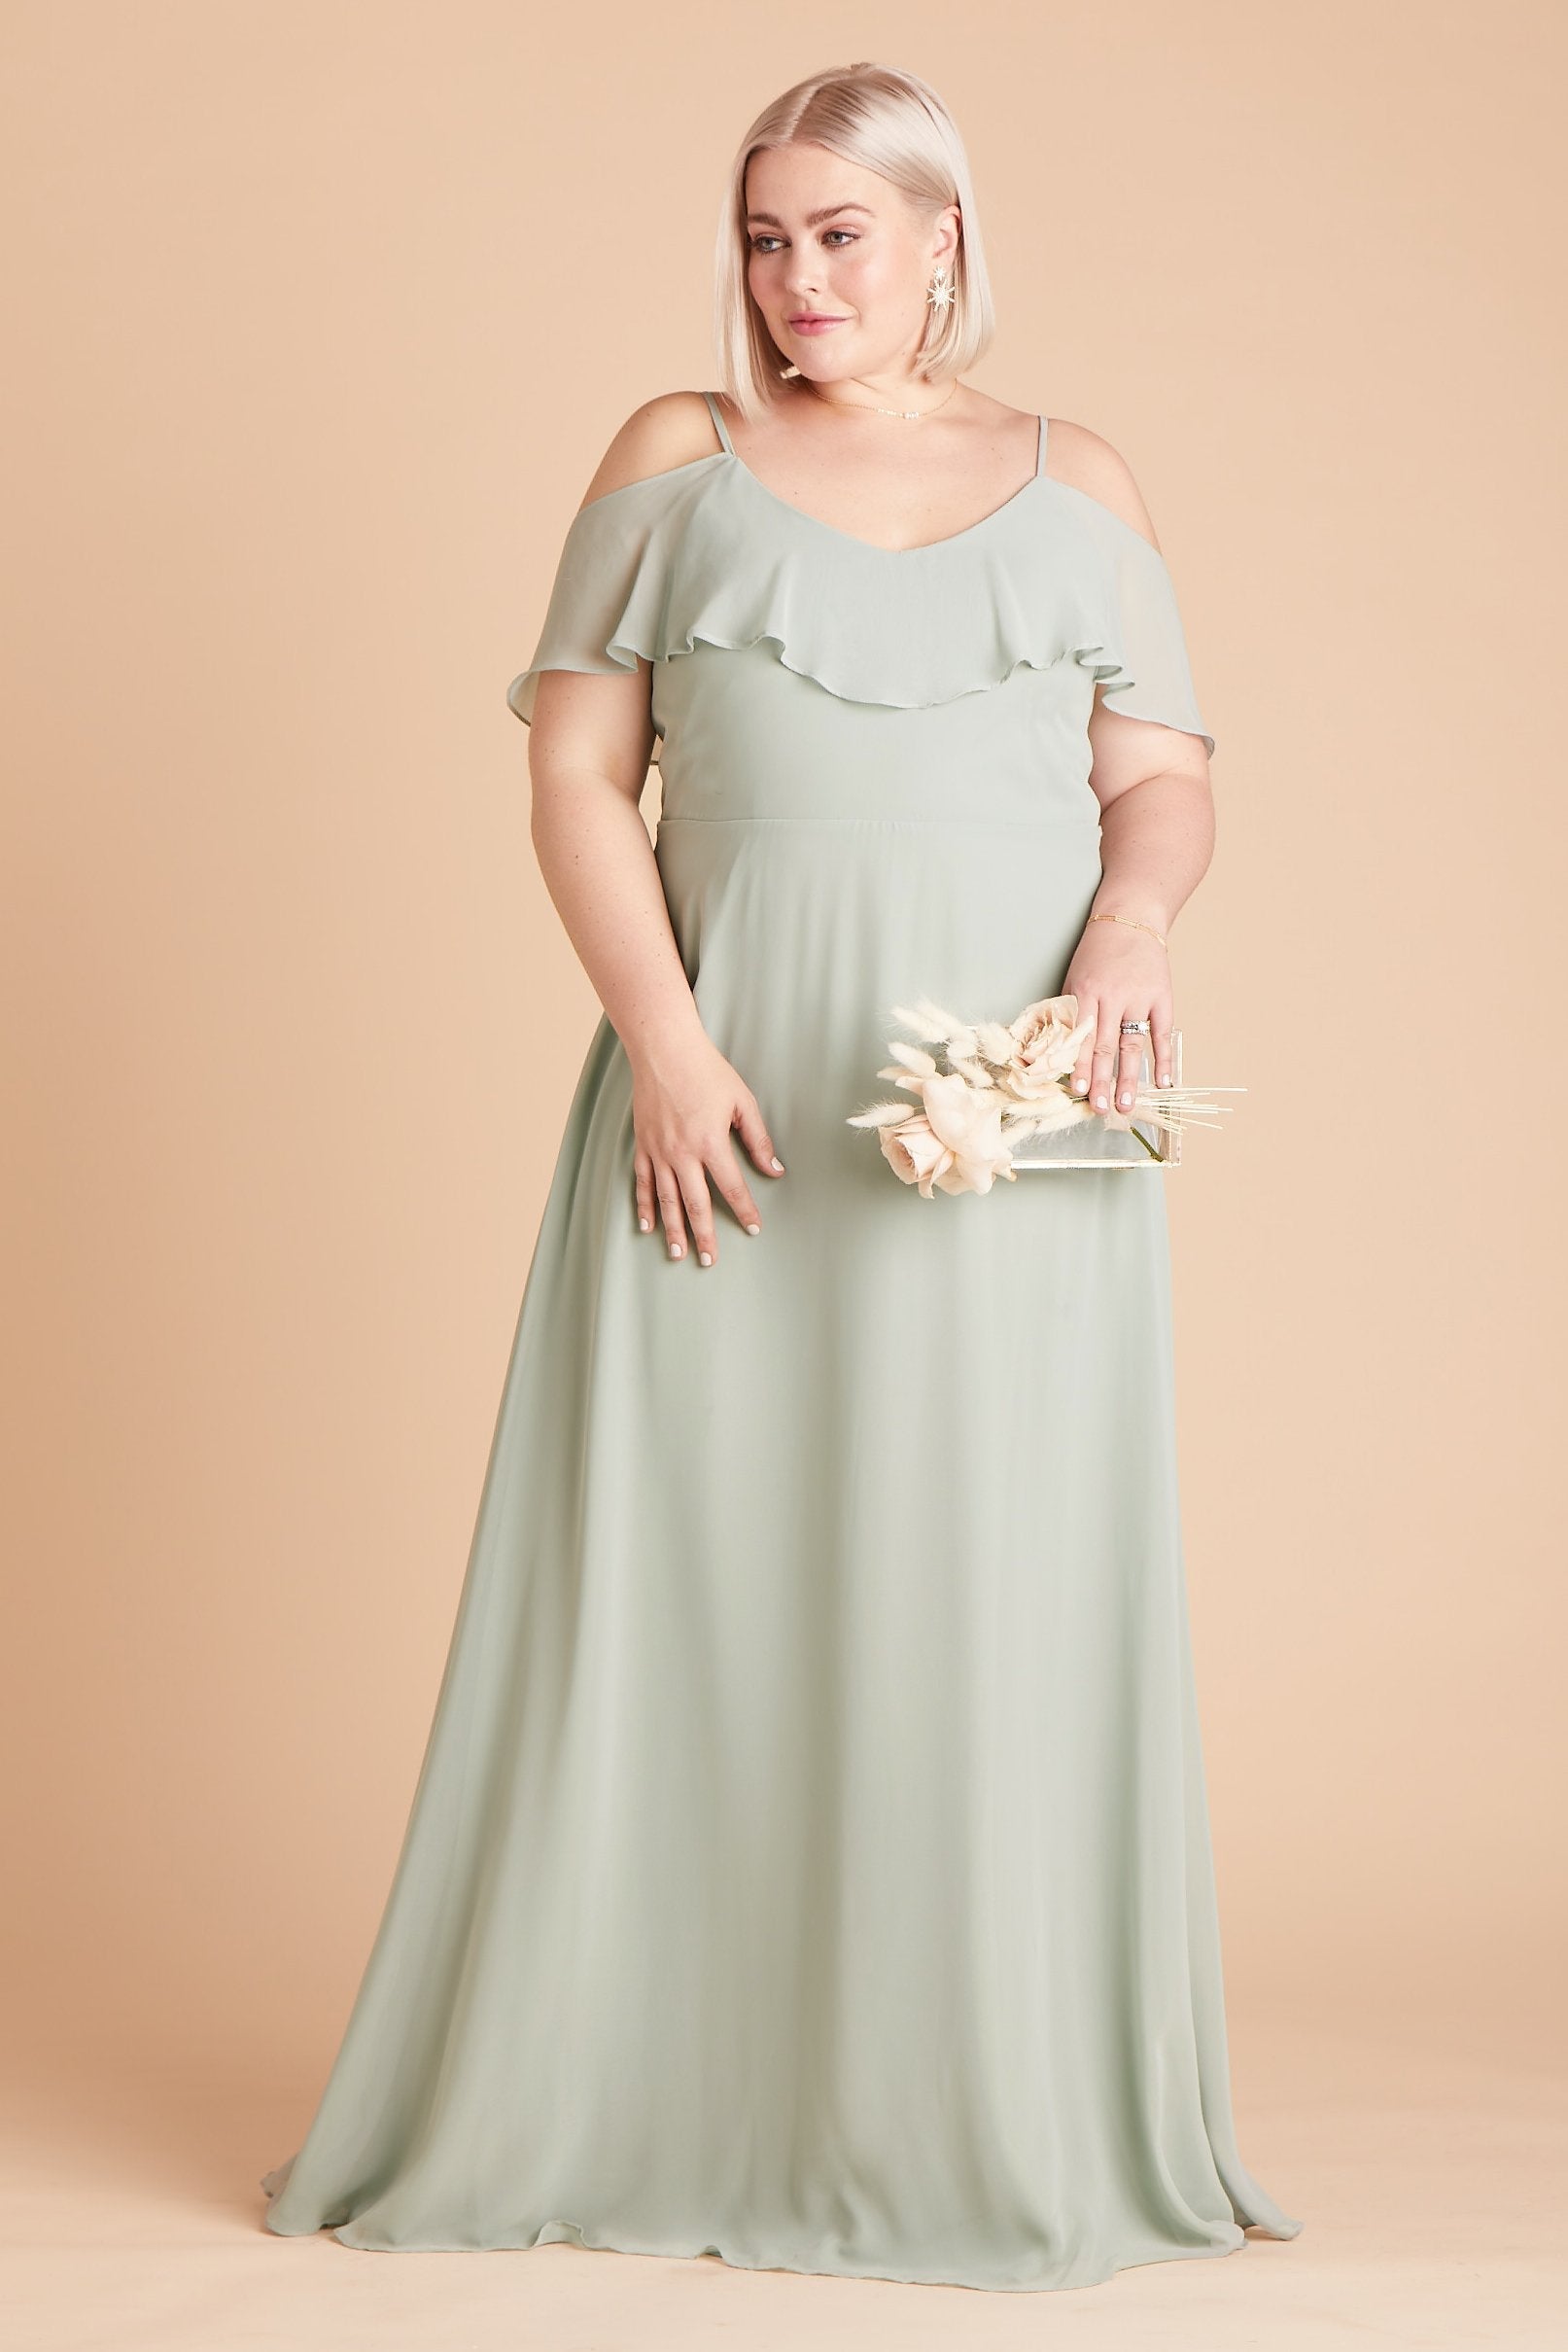 Jane convertible plus size bridesmaid dress in sage green chiffon by Birdy Grey, front view